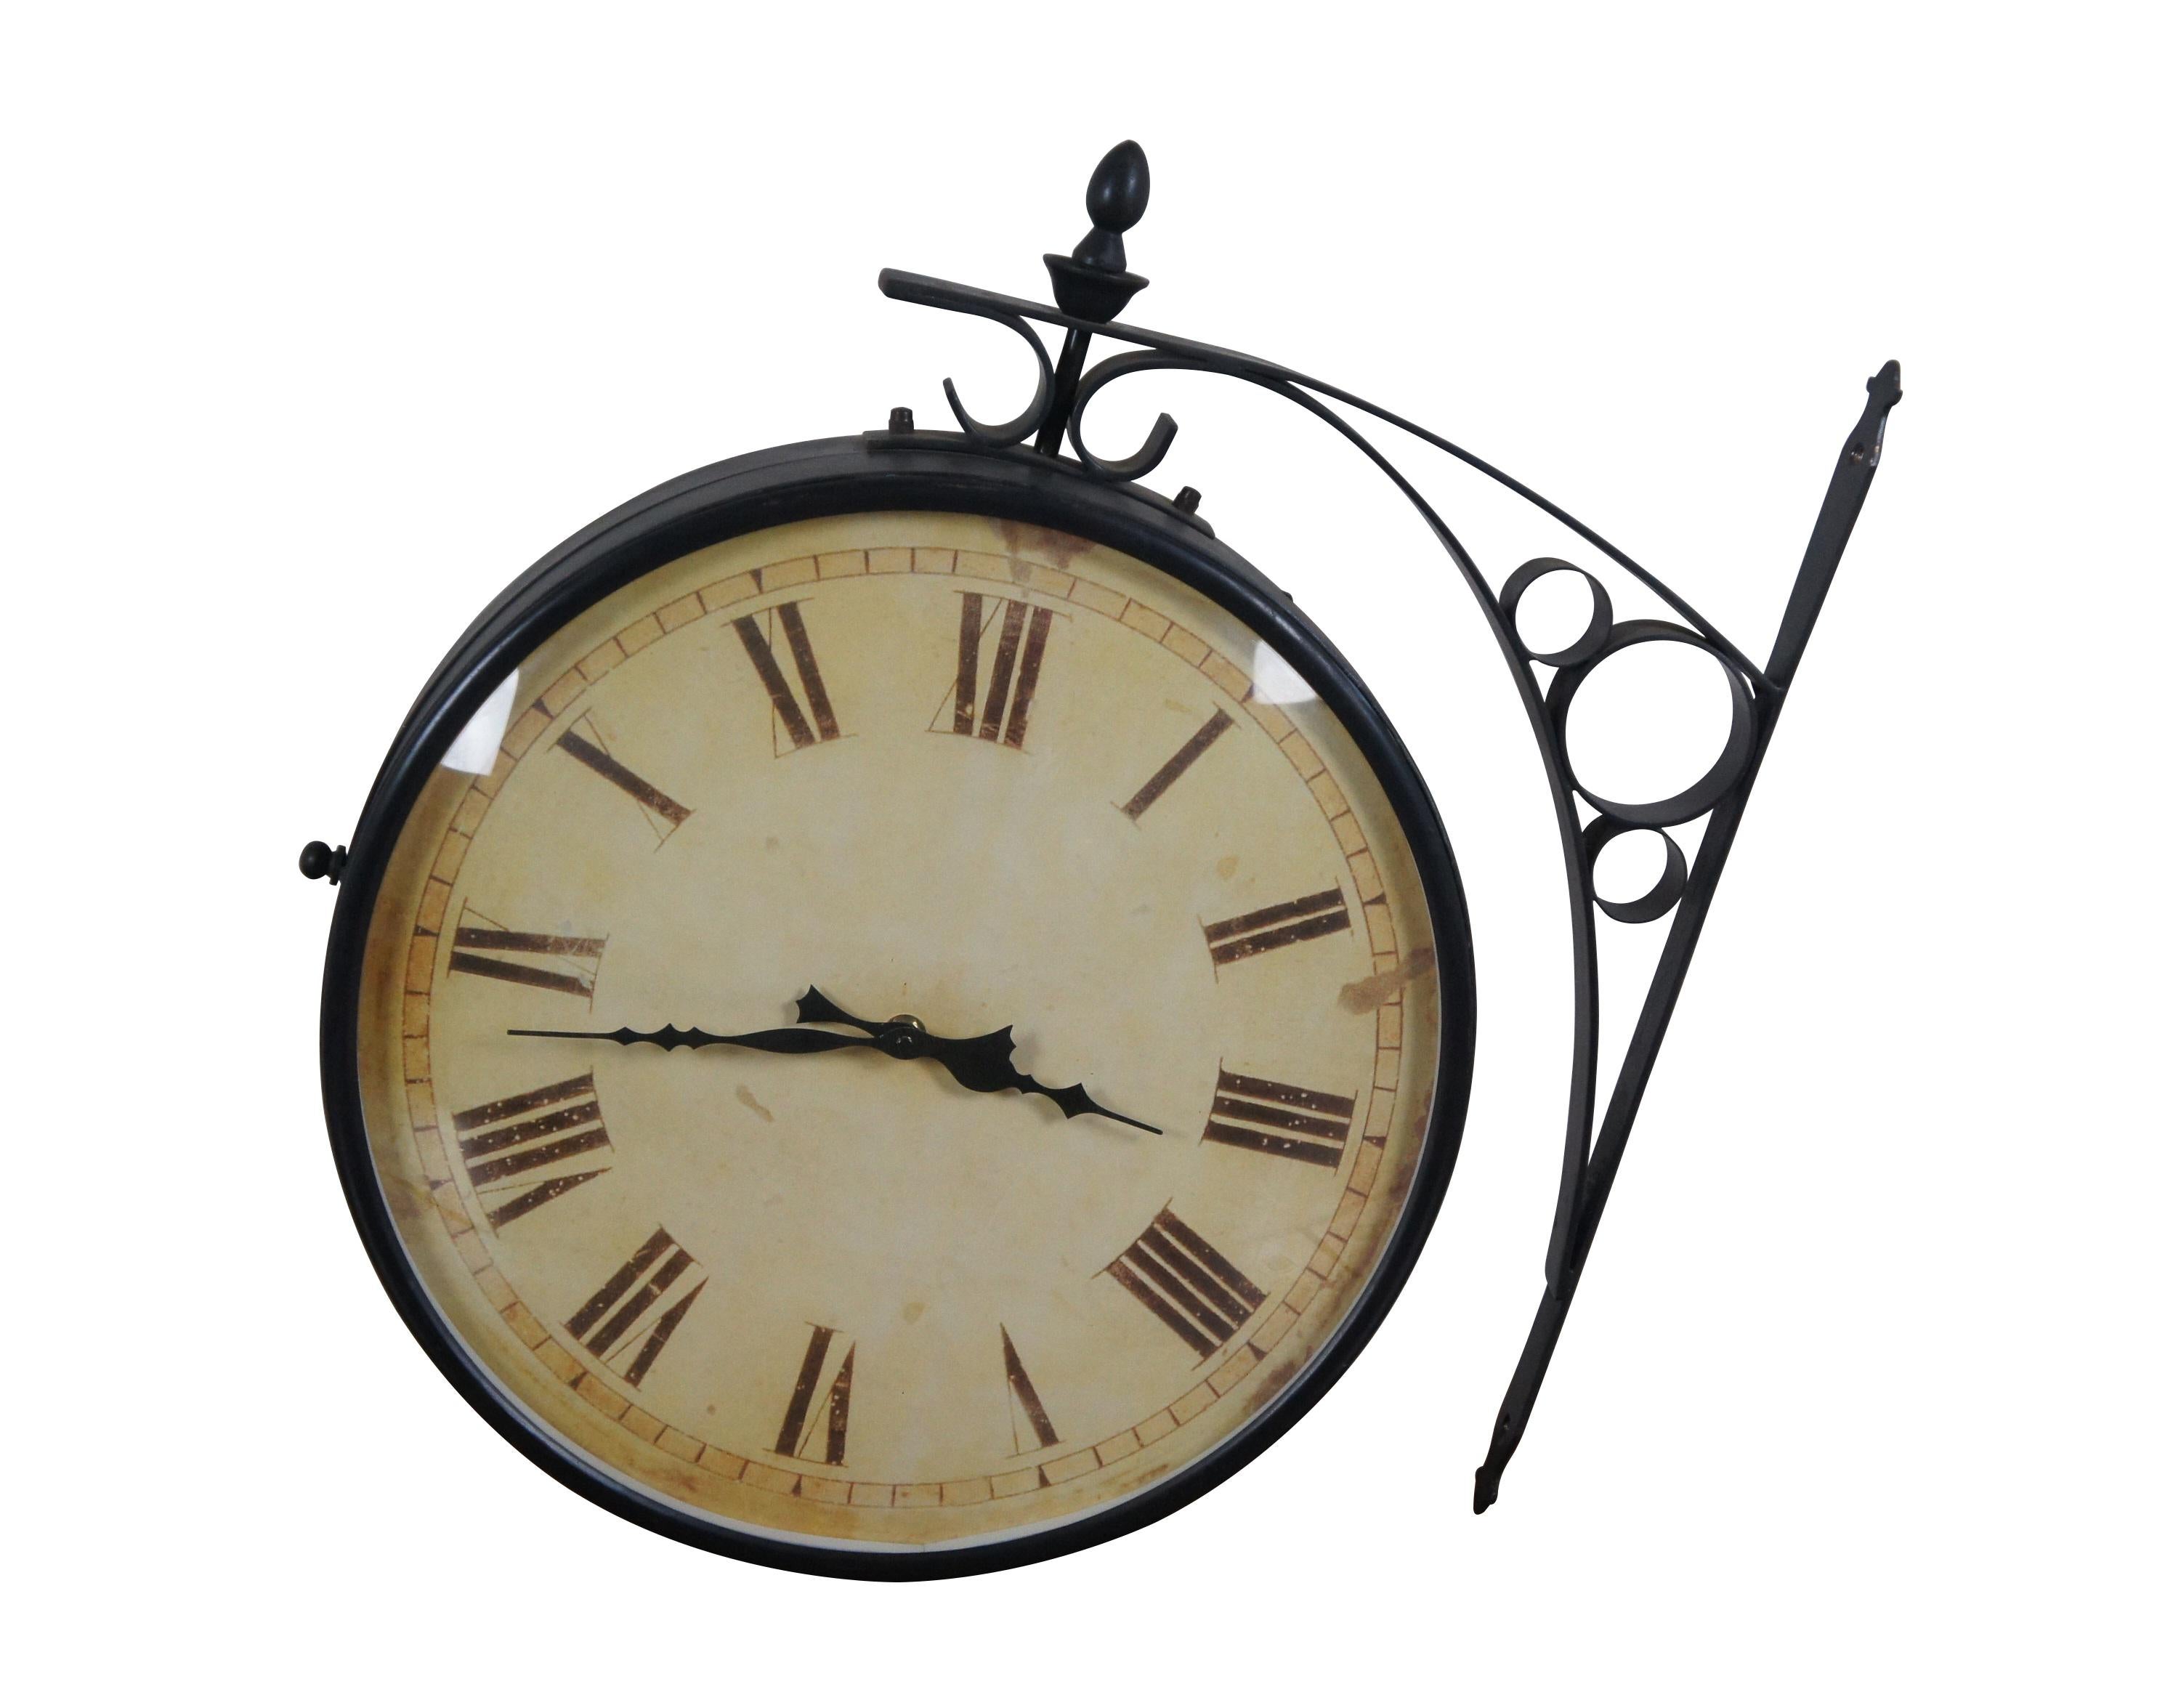 Late 20th century double sided railway clock styled after the famous clock at Victoria Station, London. Wrought metal wall mounted support and case in a dark bronze finish. 14 inch diameter printed face with faux distressing and Roman numerals.